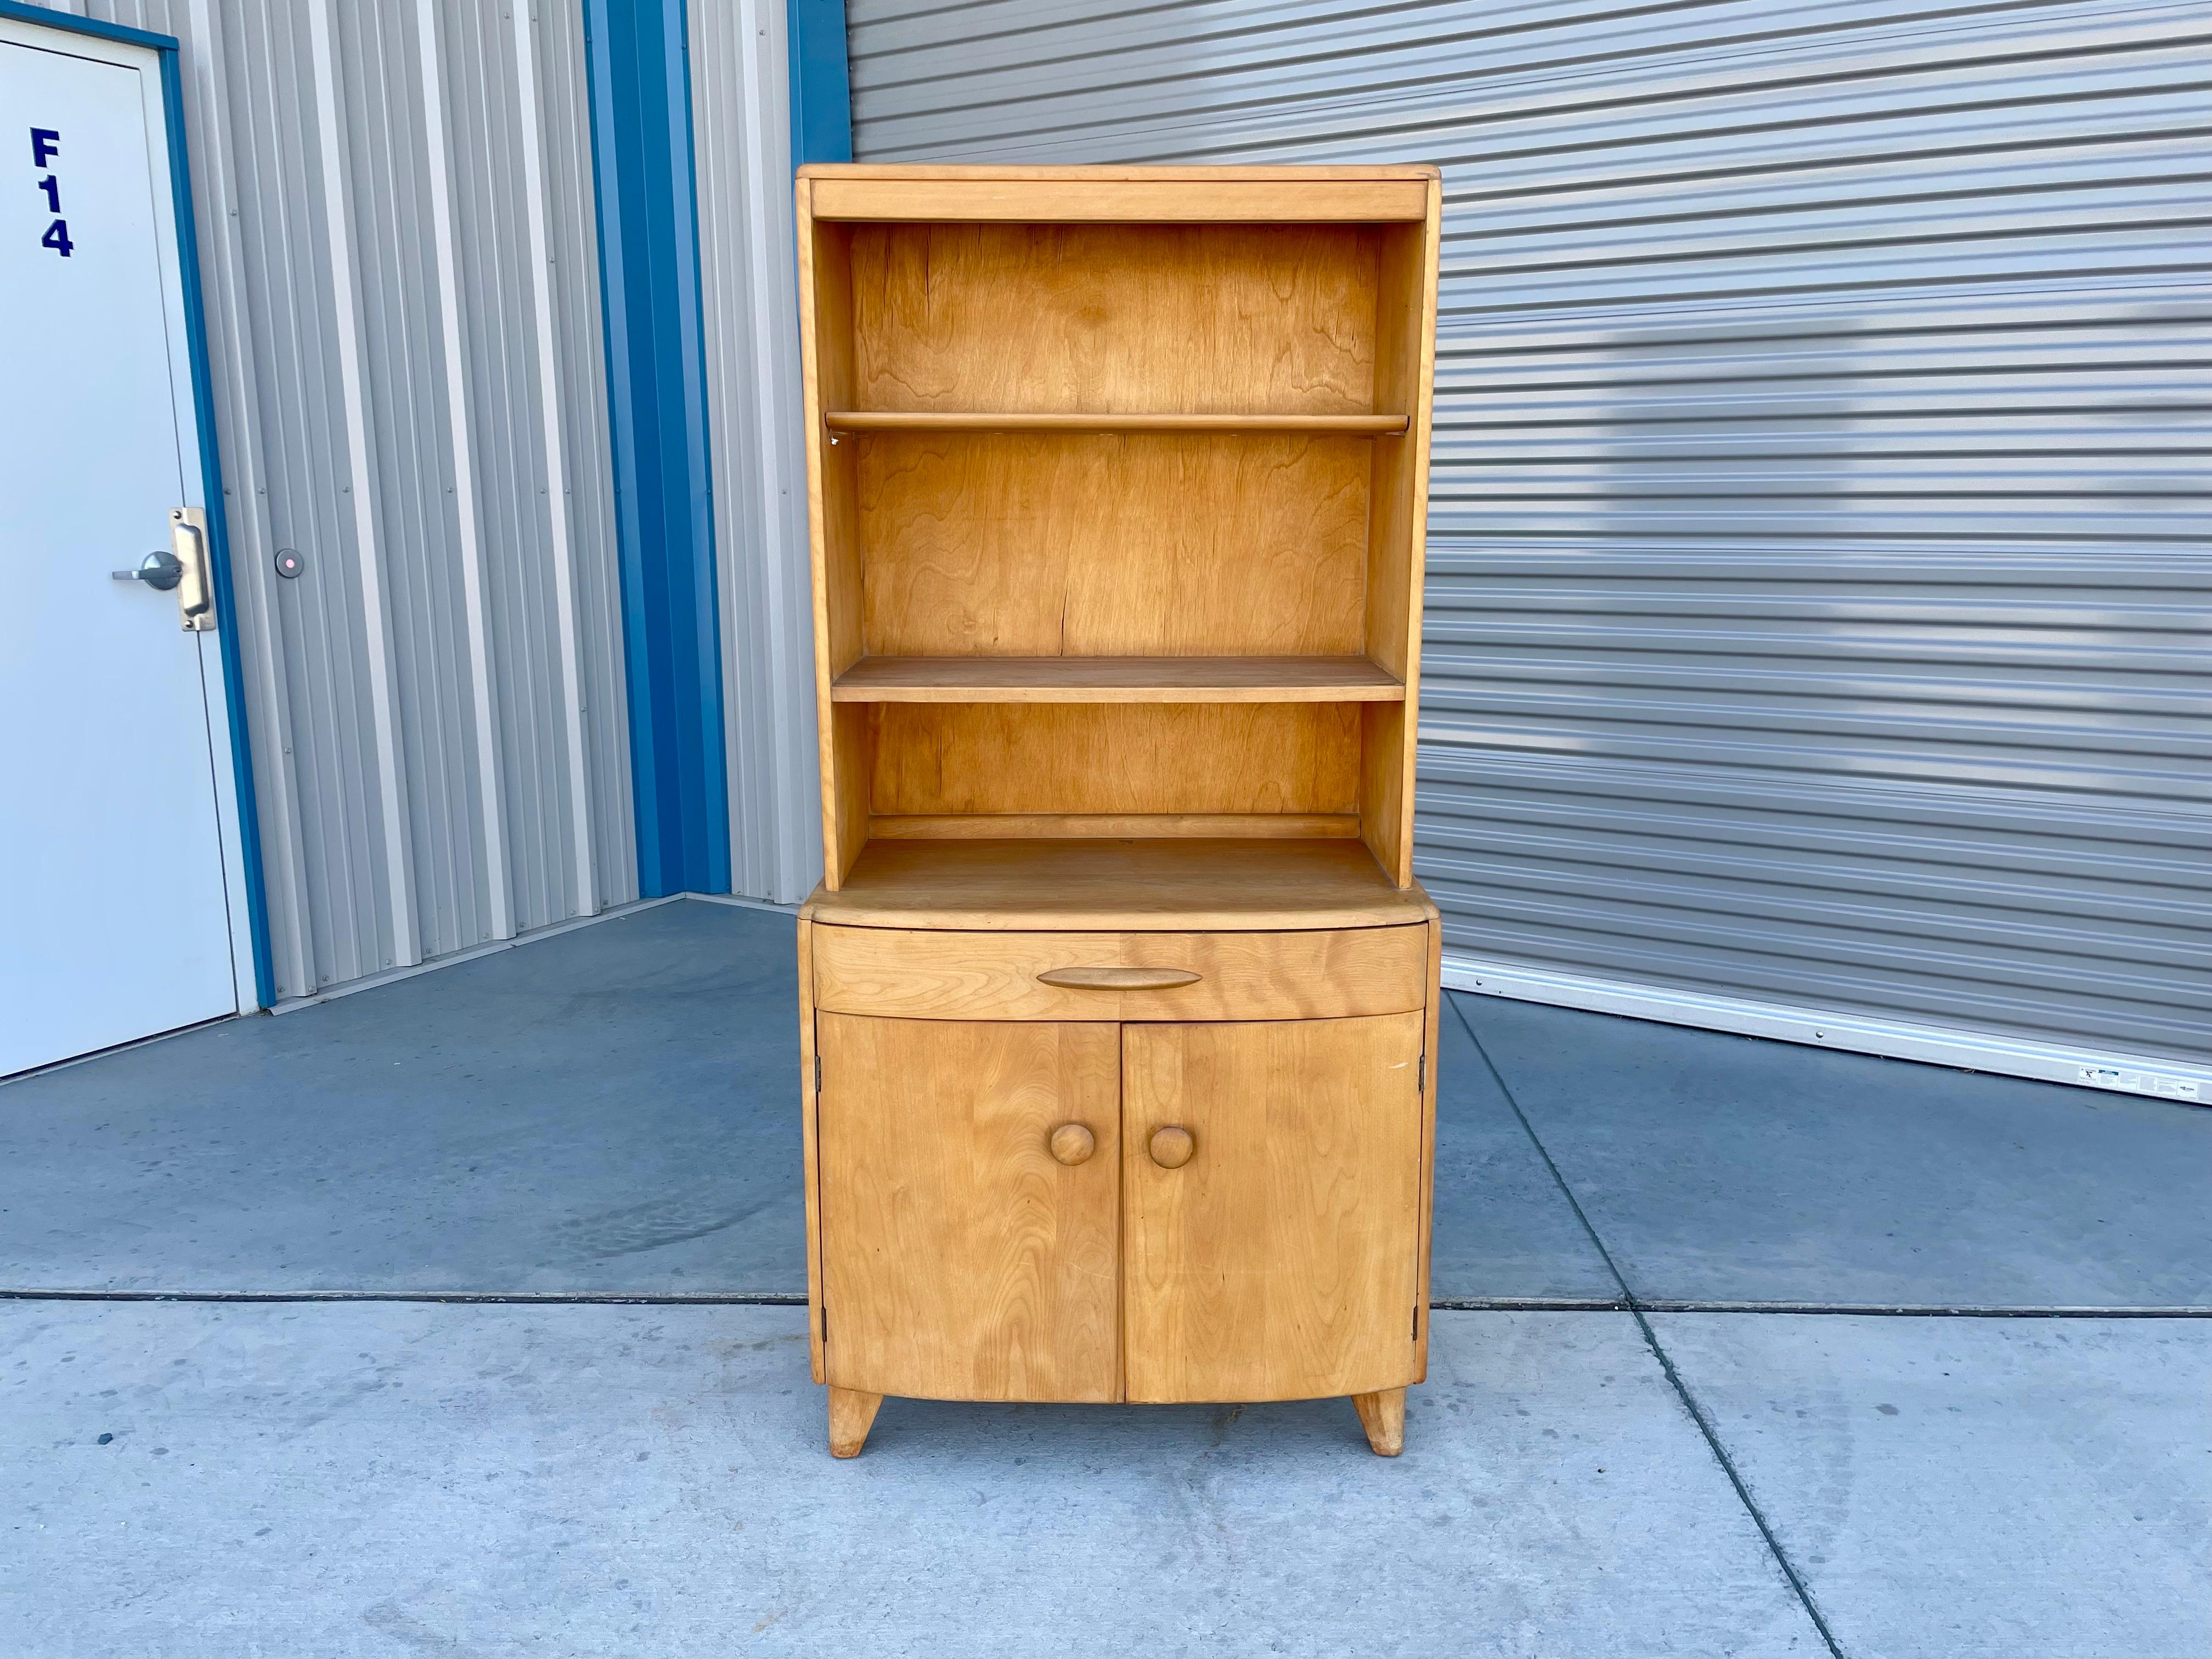 Mid-century cabinet designed and manufactured by Heywood Wakefieldcrica 1960s. This stunning cabinet features a maple frame that easily separates into two pieces, making it easy to transport. The bottom piece comes with one drawer, while the top